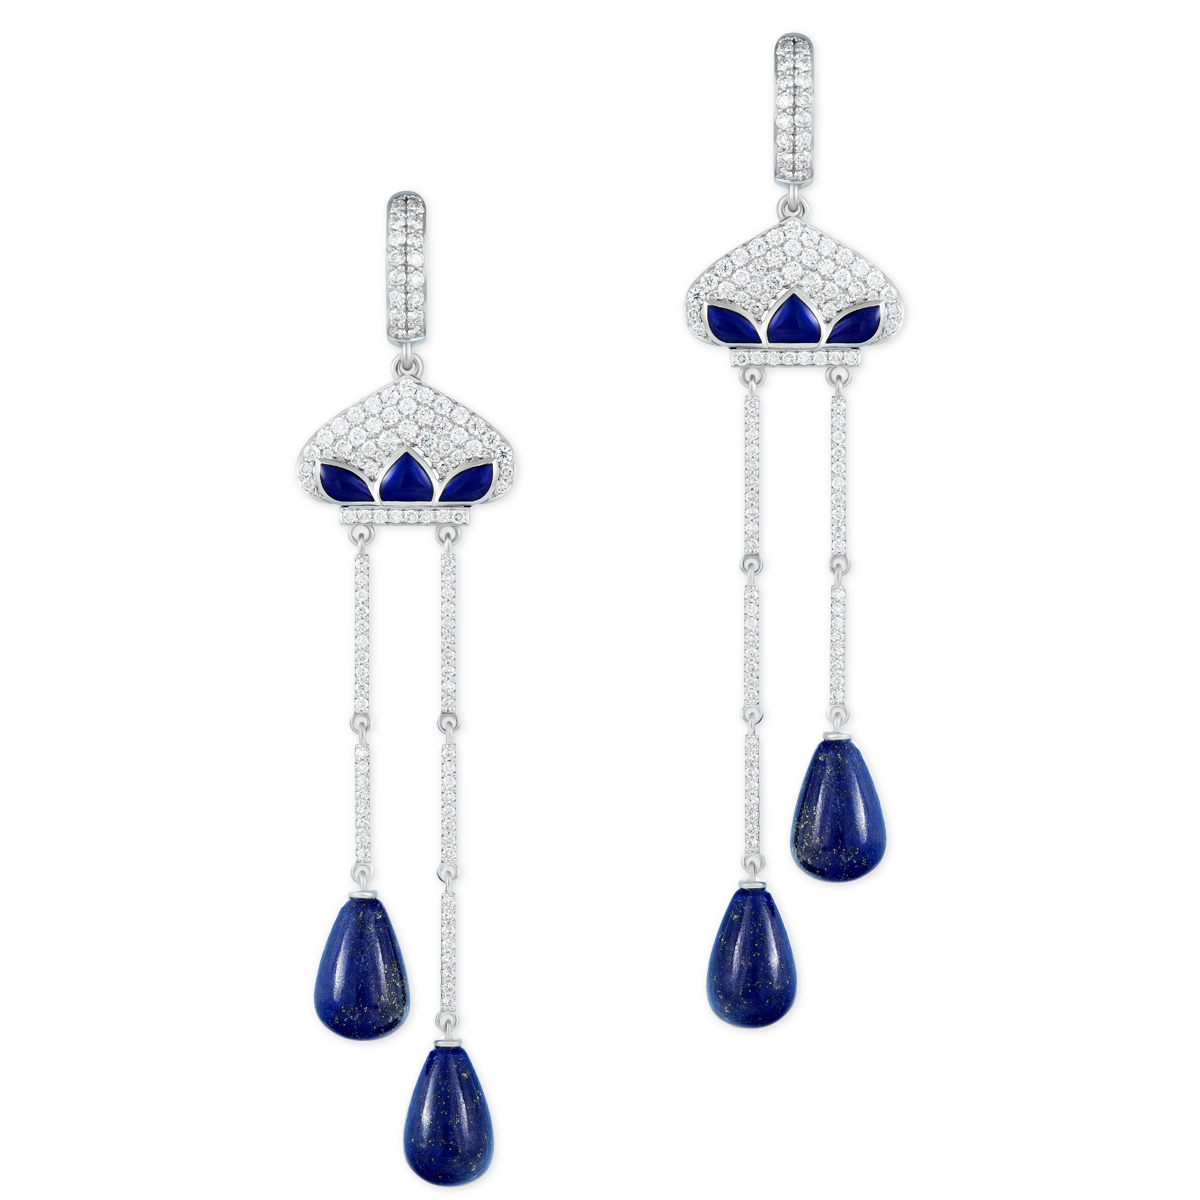 Earrings from the collection "Samarkand"